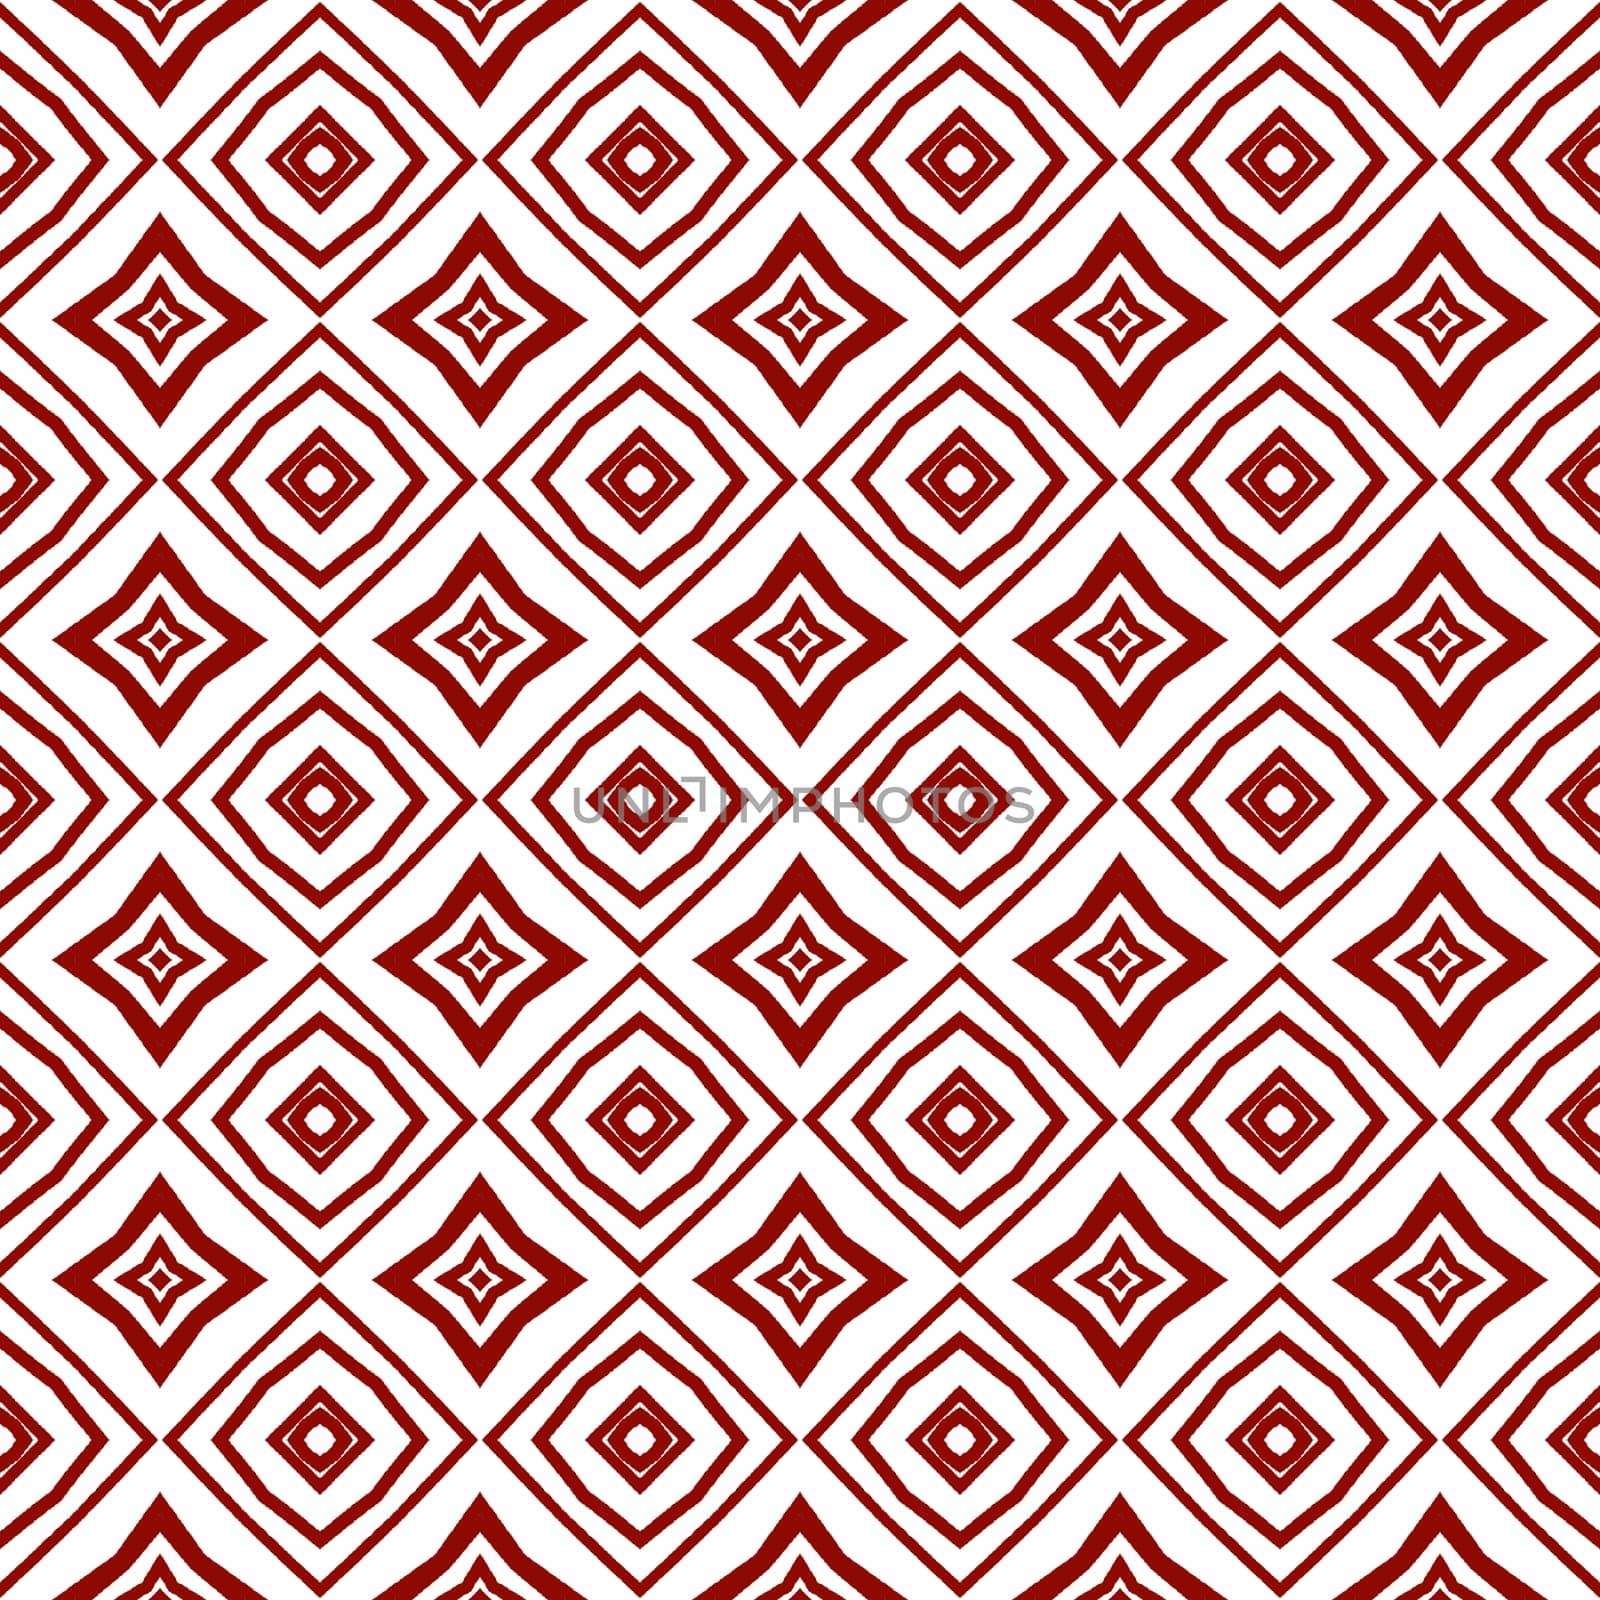 Ethnic hand painted pattern. Maroon symmetrical by beginagain